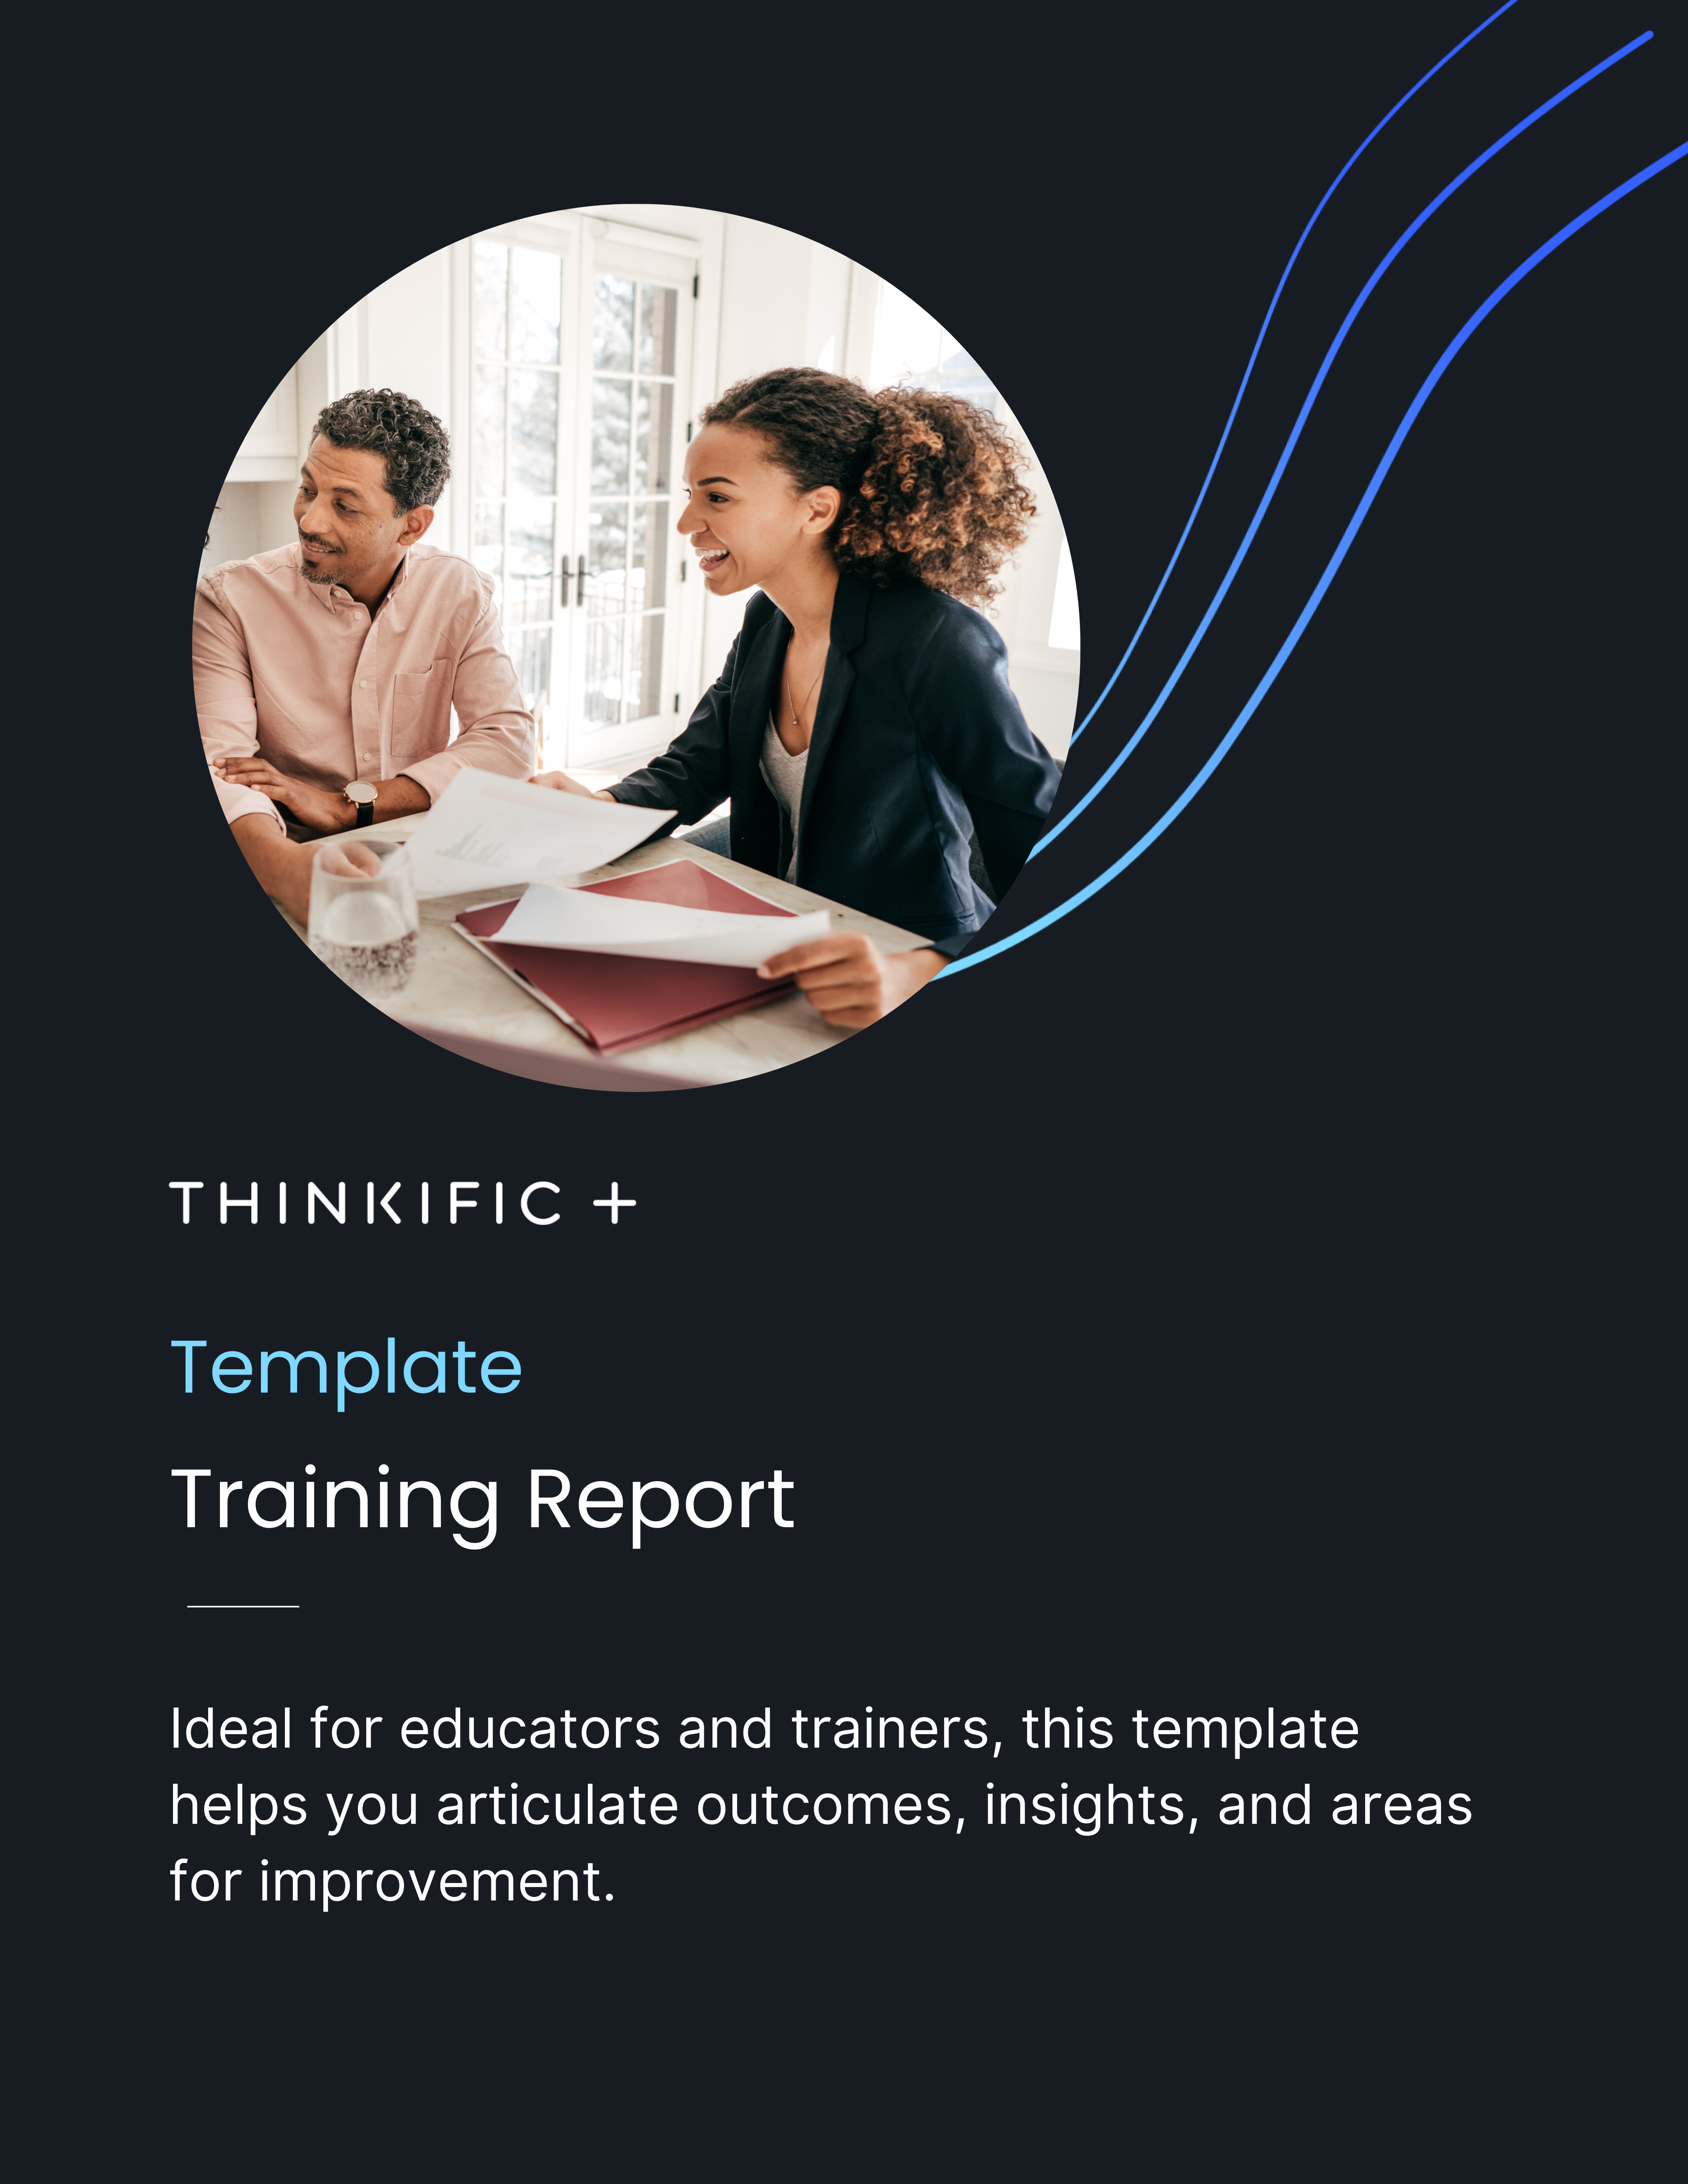 Free Training Report Template: Download Now